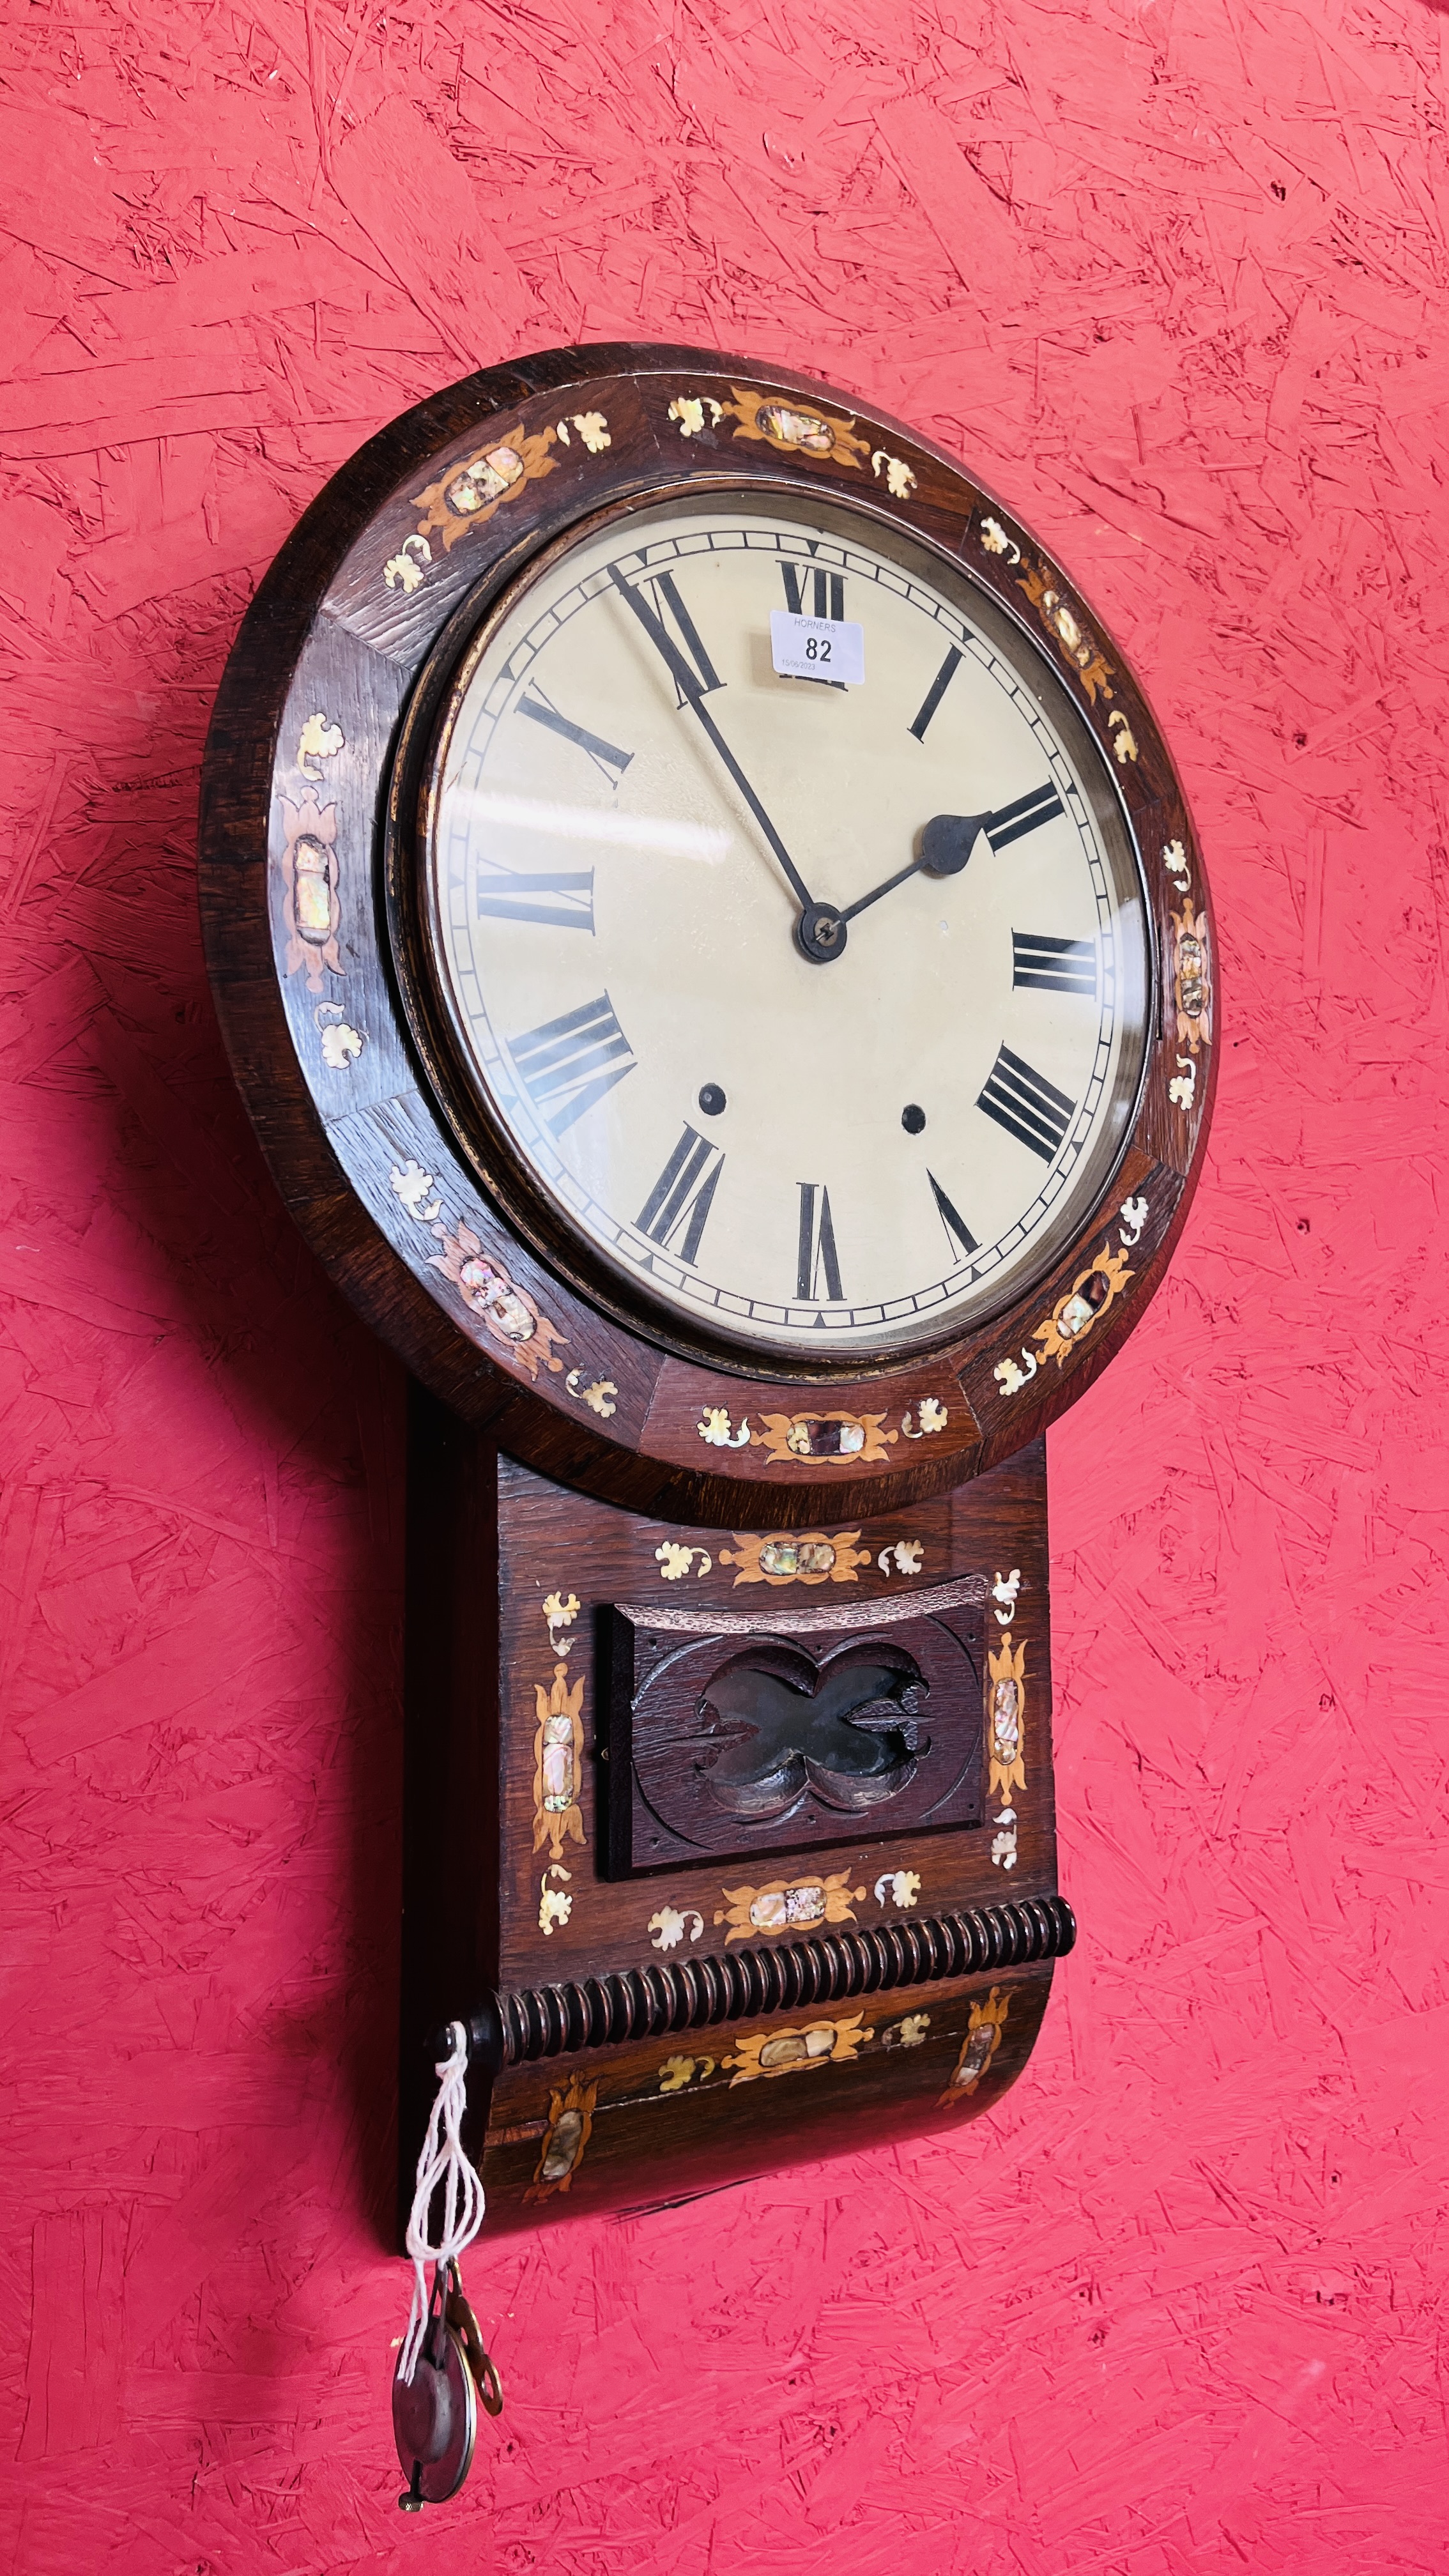 AN ANTIQUE GINGERBREAD STYLE MAHOGANY WALL CLOCK WITH MOTHER OF PEARL INLAY.